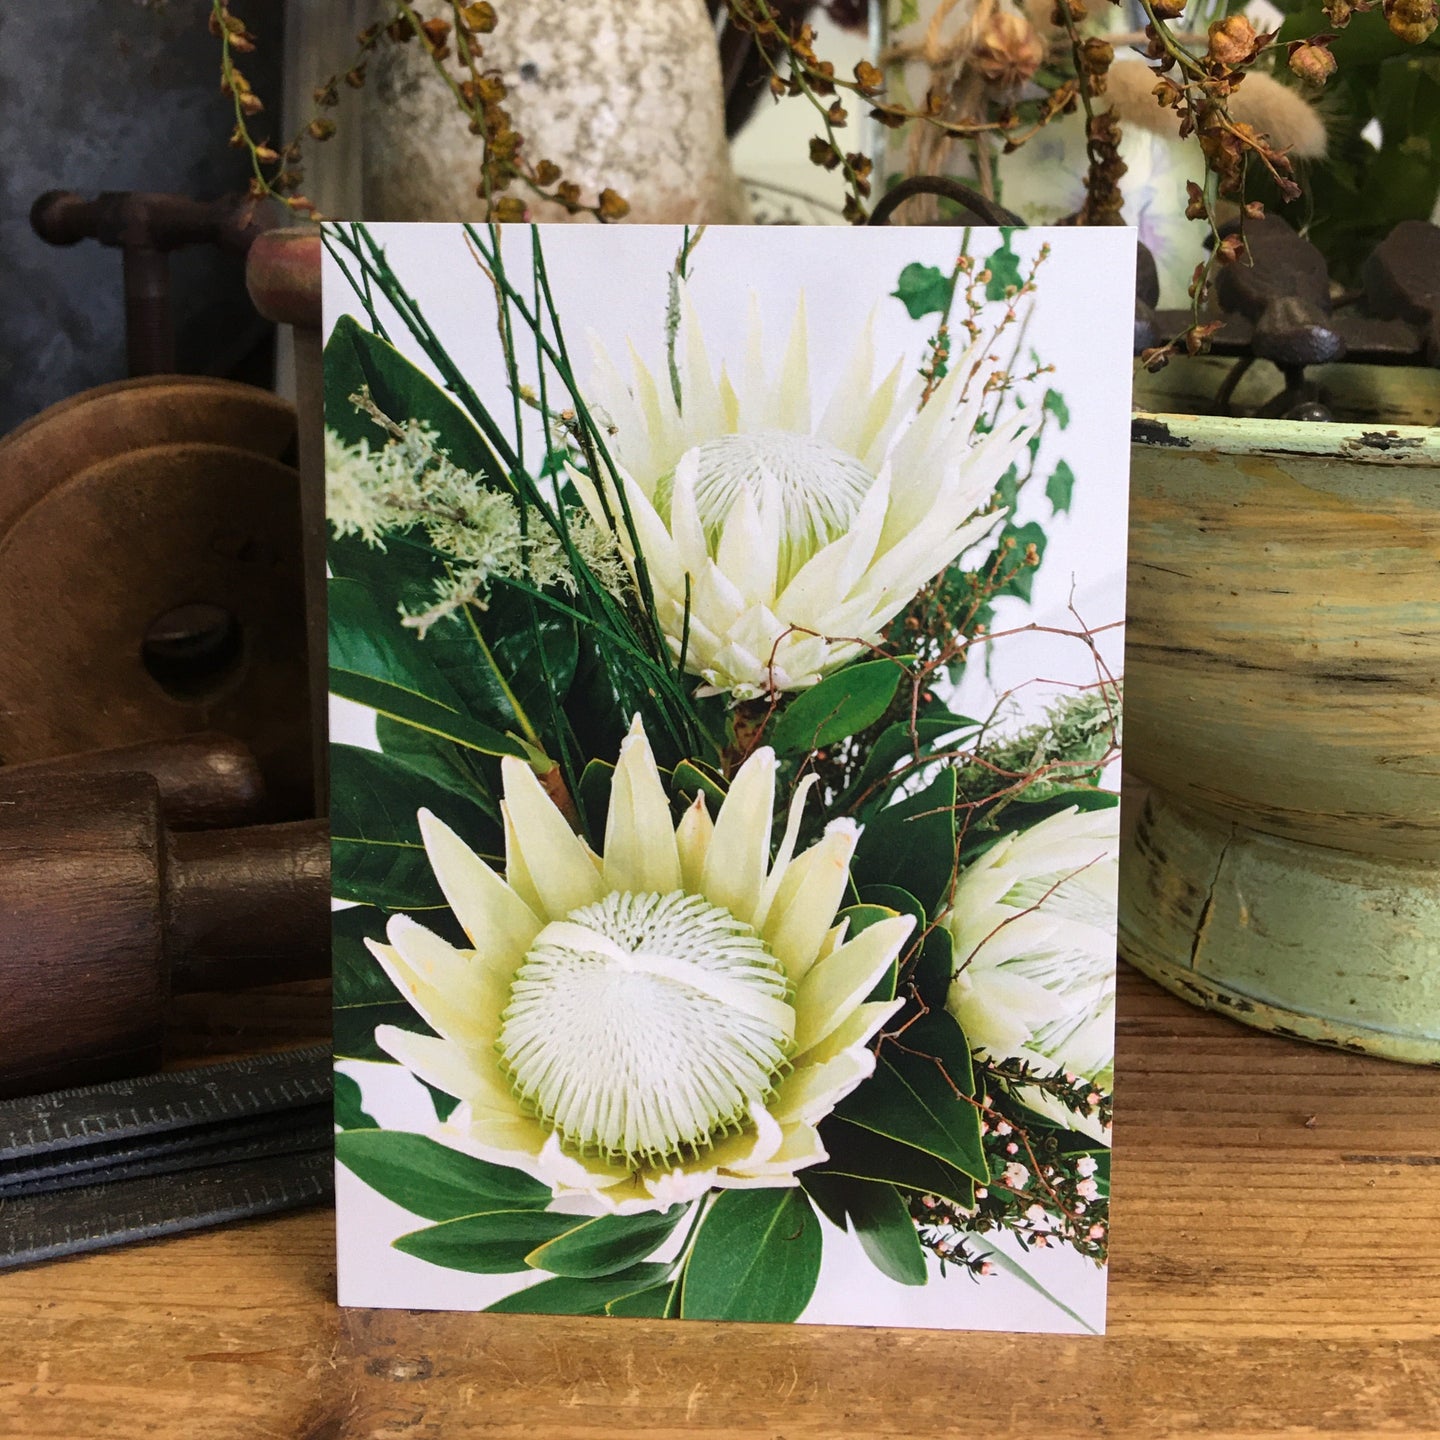 blanc card featuring close up image of classic blanc signature arrangement  showing lovely white proteas